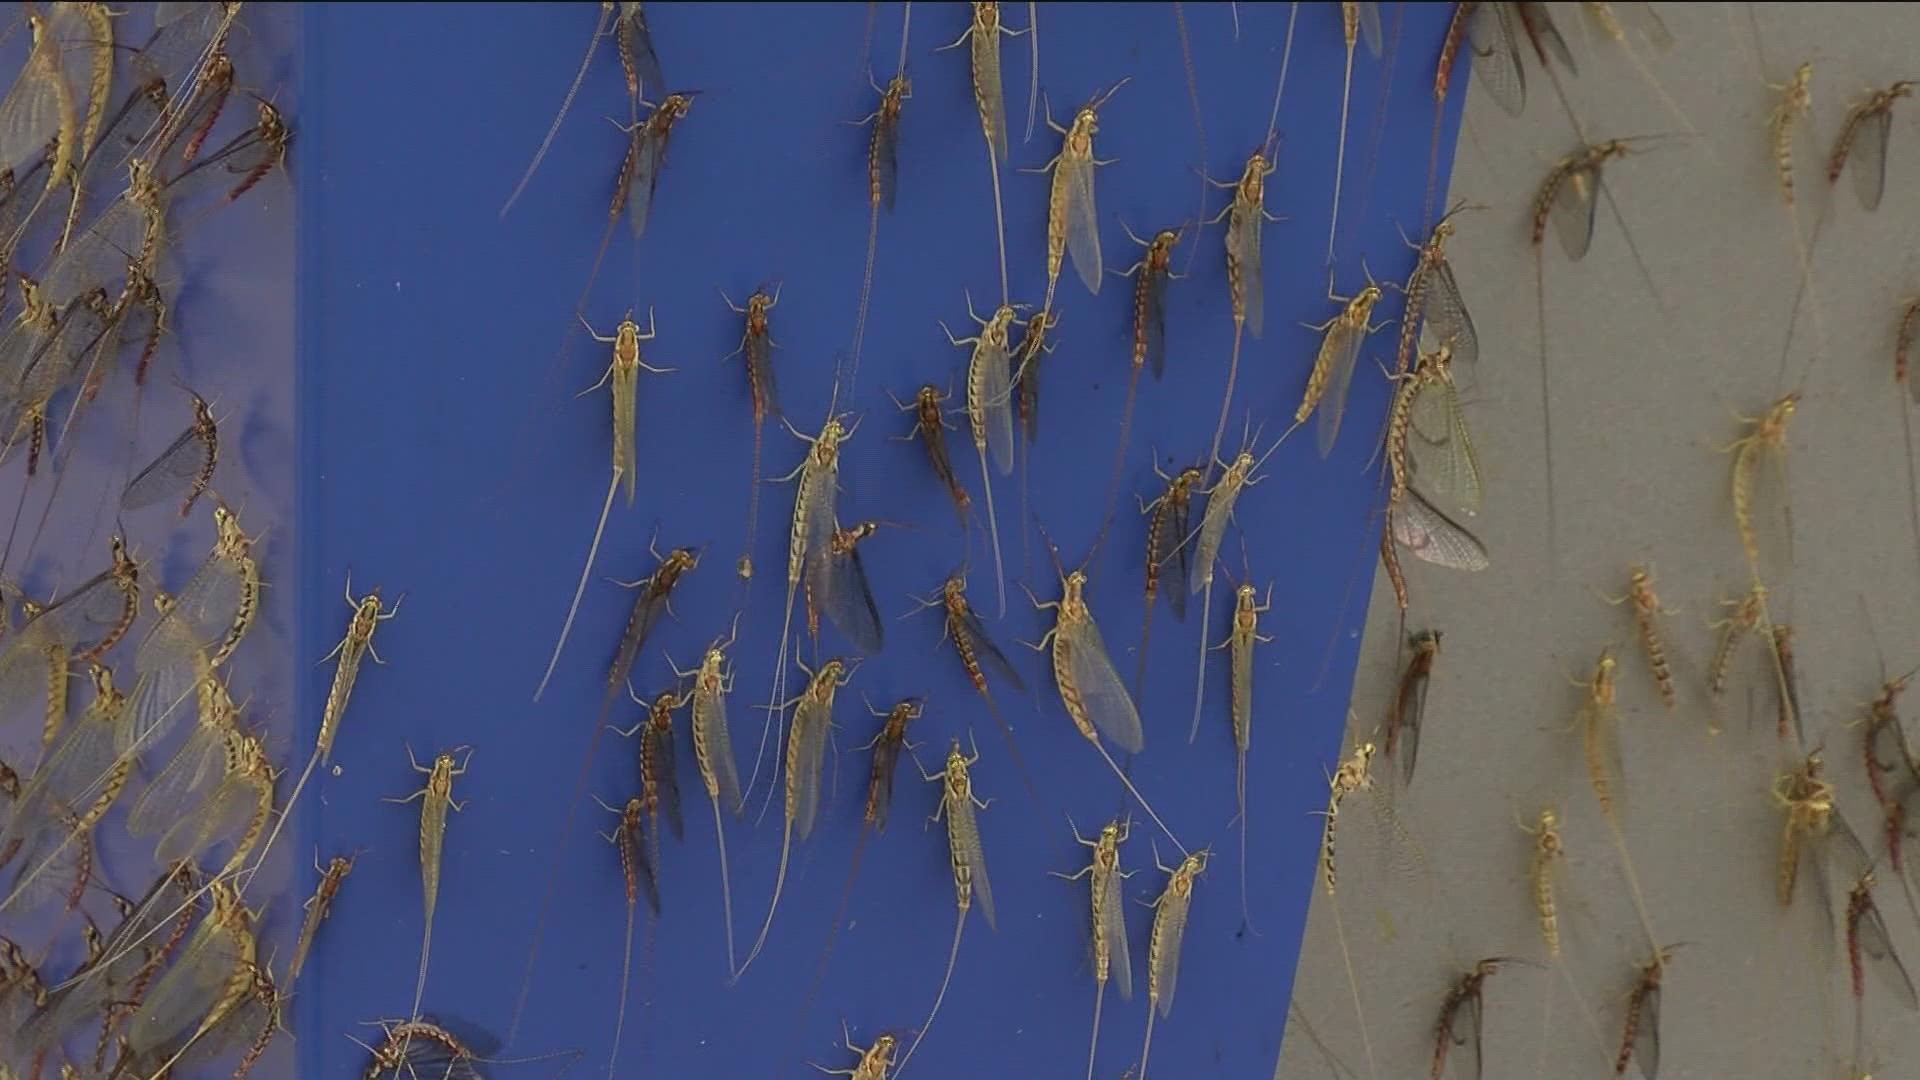 Mayflies are a common sight along the lakeshore and can come in swarms in parts of northwest Ohio.